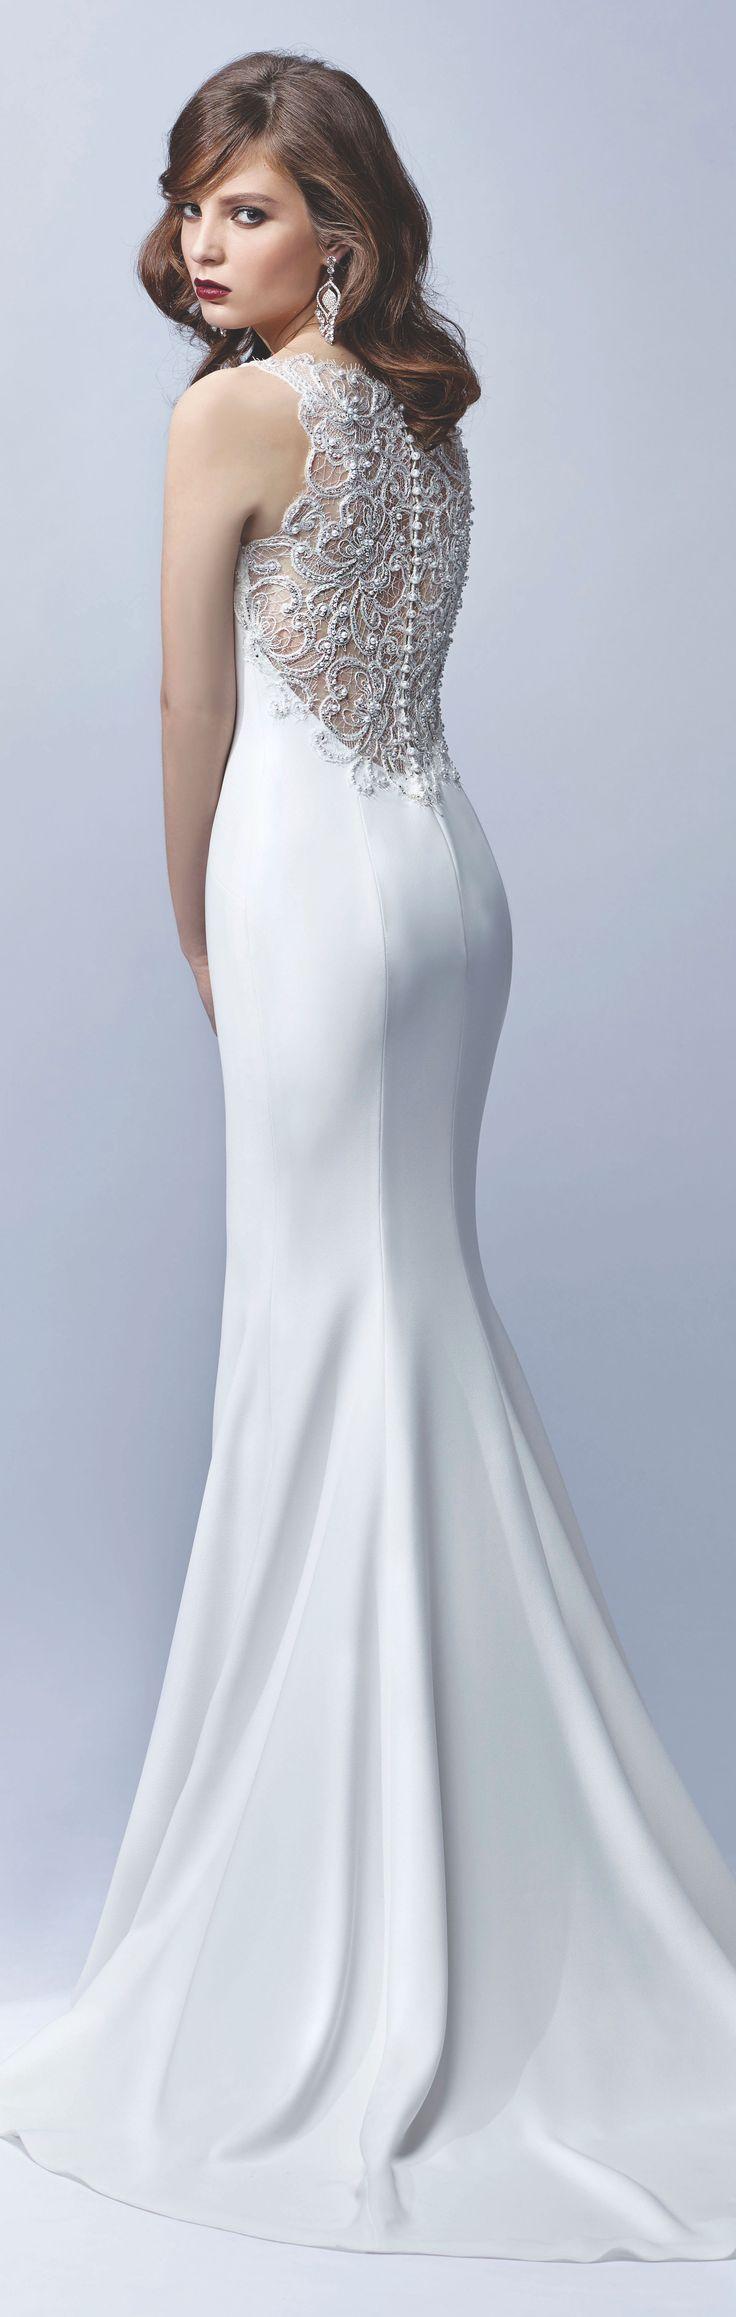 Mariage - Wedding Dresses & Bridal Gowns Summer/Winter 2015 Collection UK - Enzoani